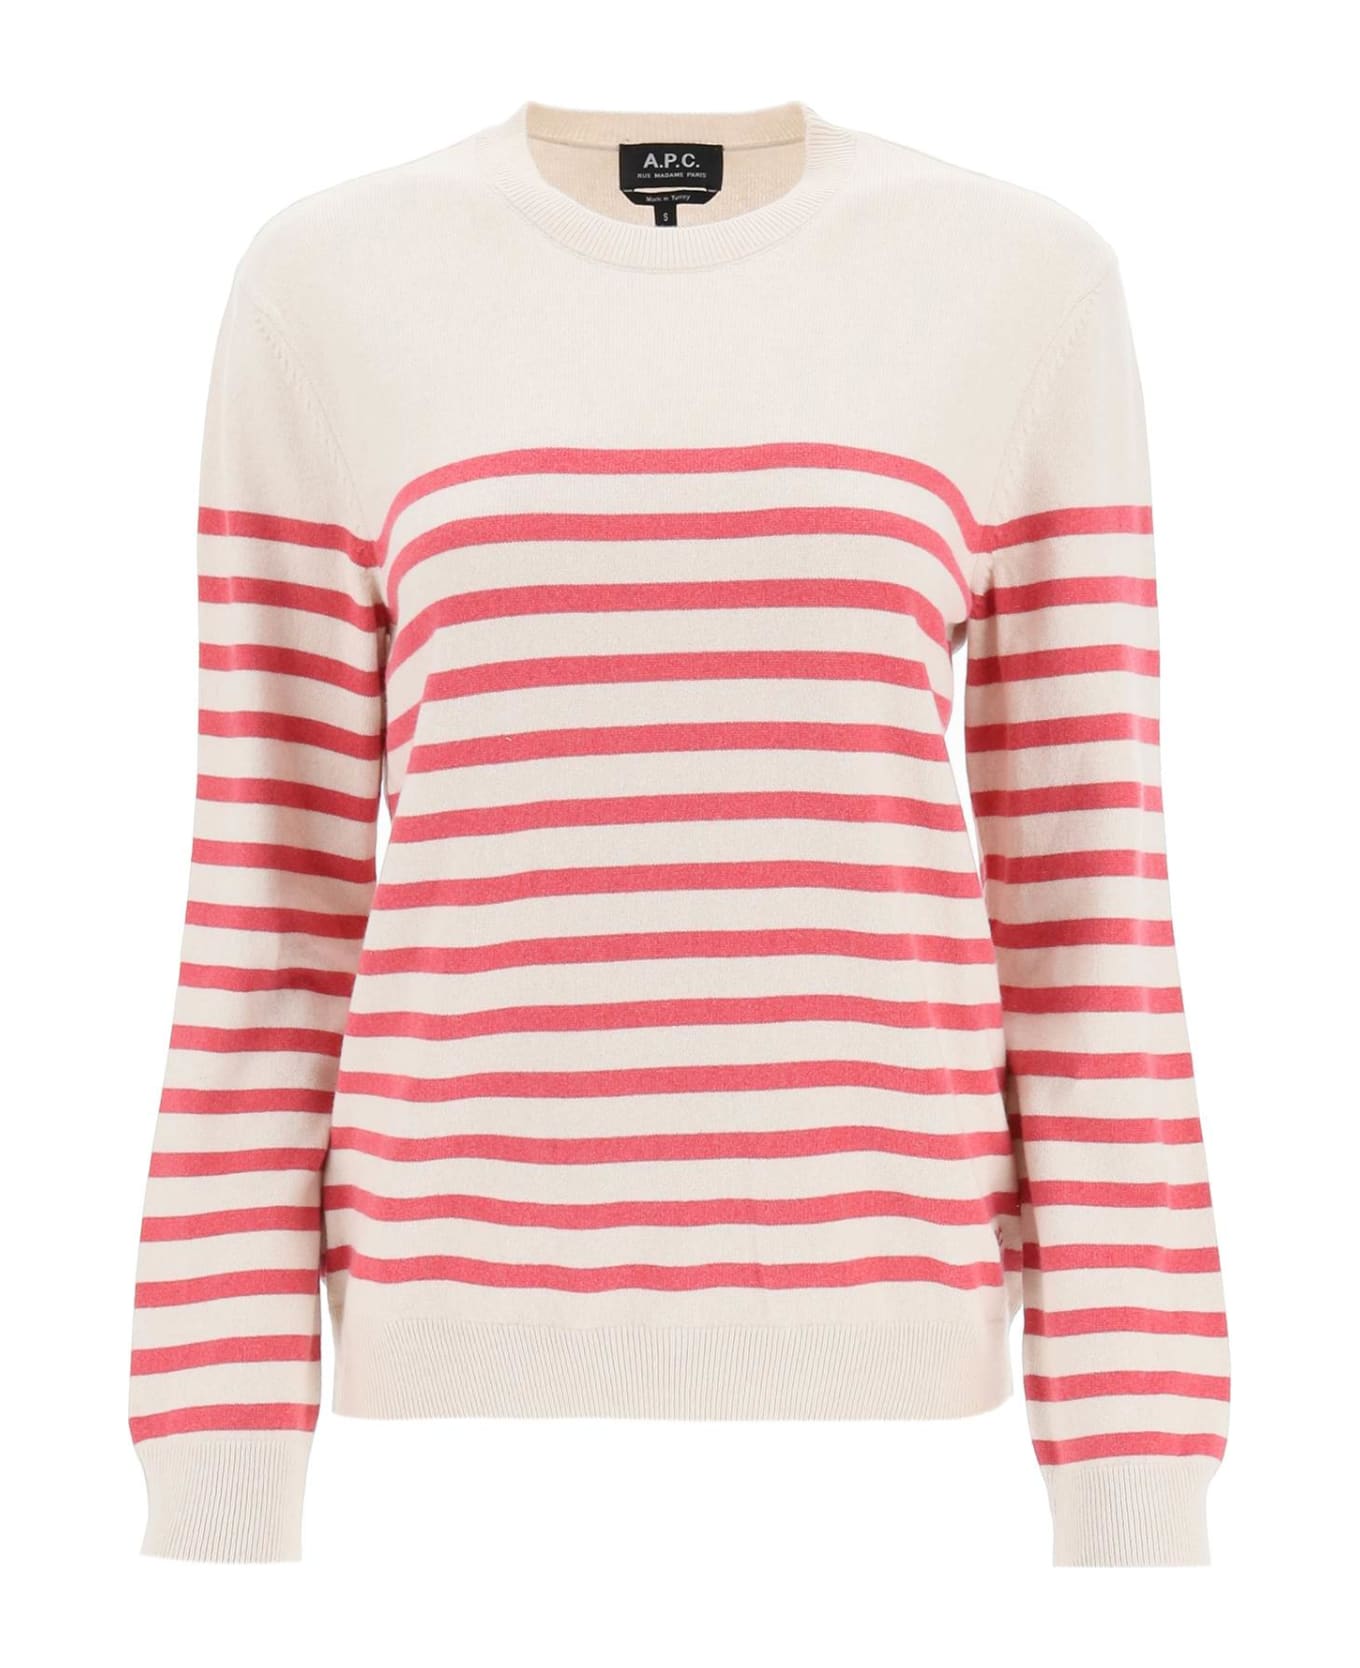 A.P.C. 'phoebe' Striped Cashmere And Cotton Sweater - Beige